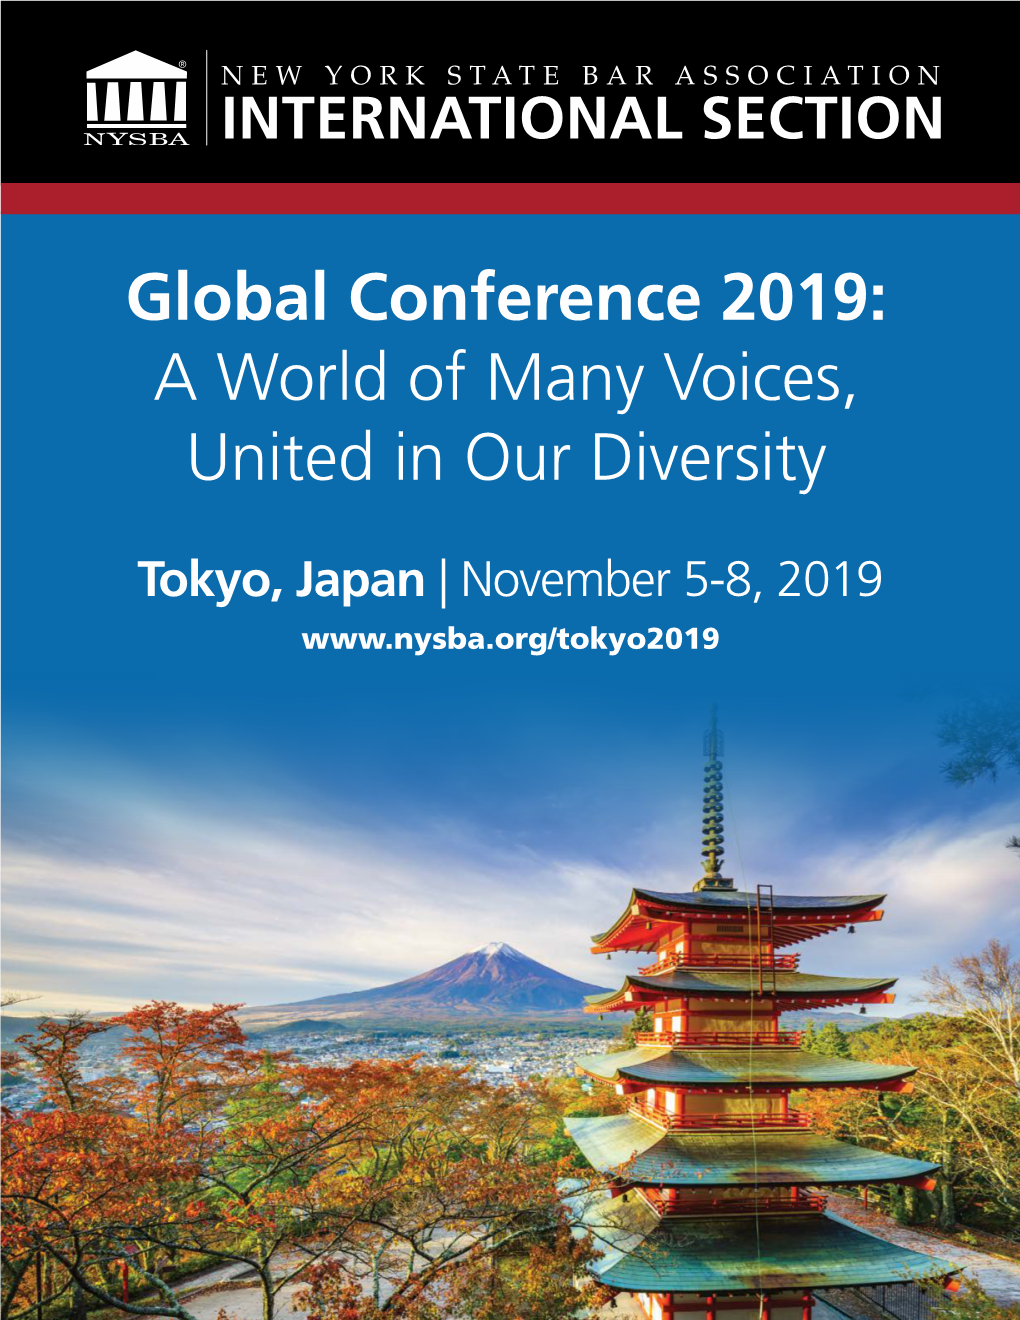 Global Conference 2019: a World of Many Voices, United in Our Diversity